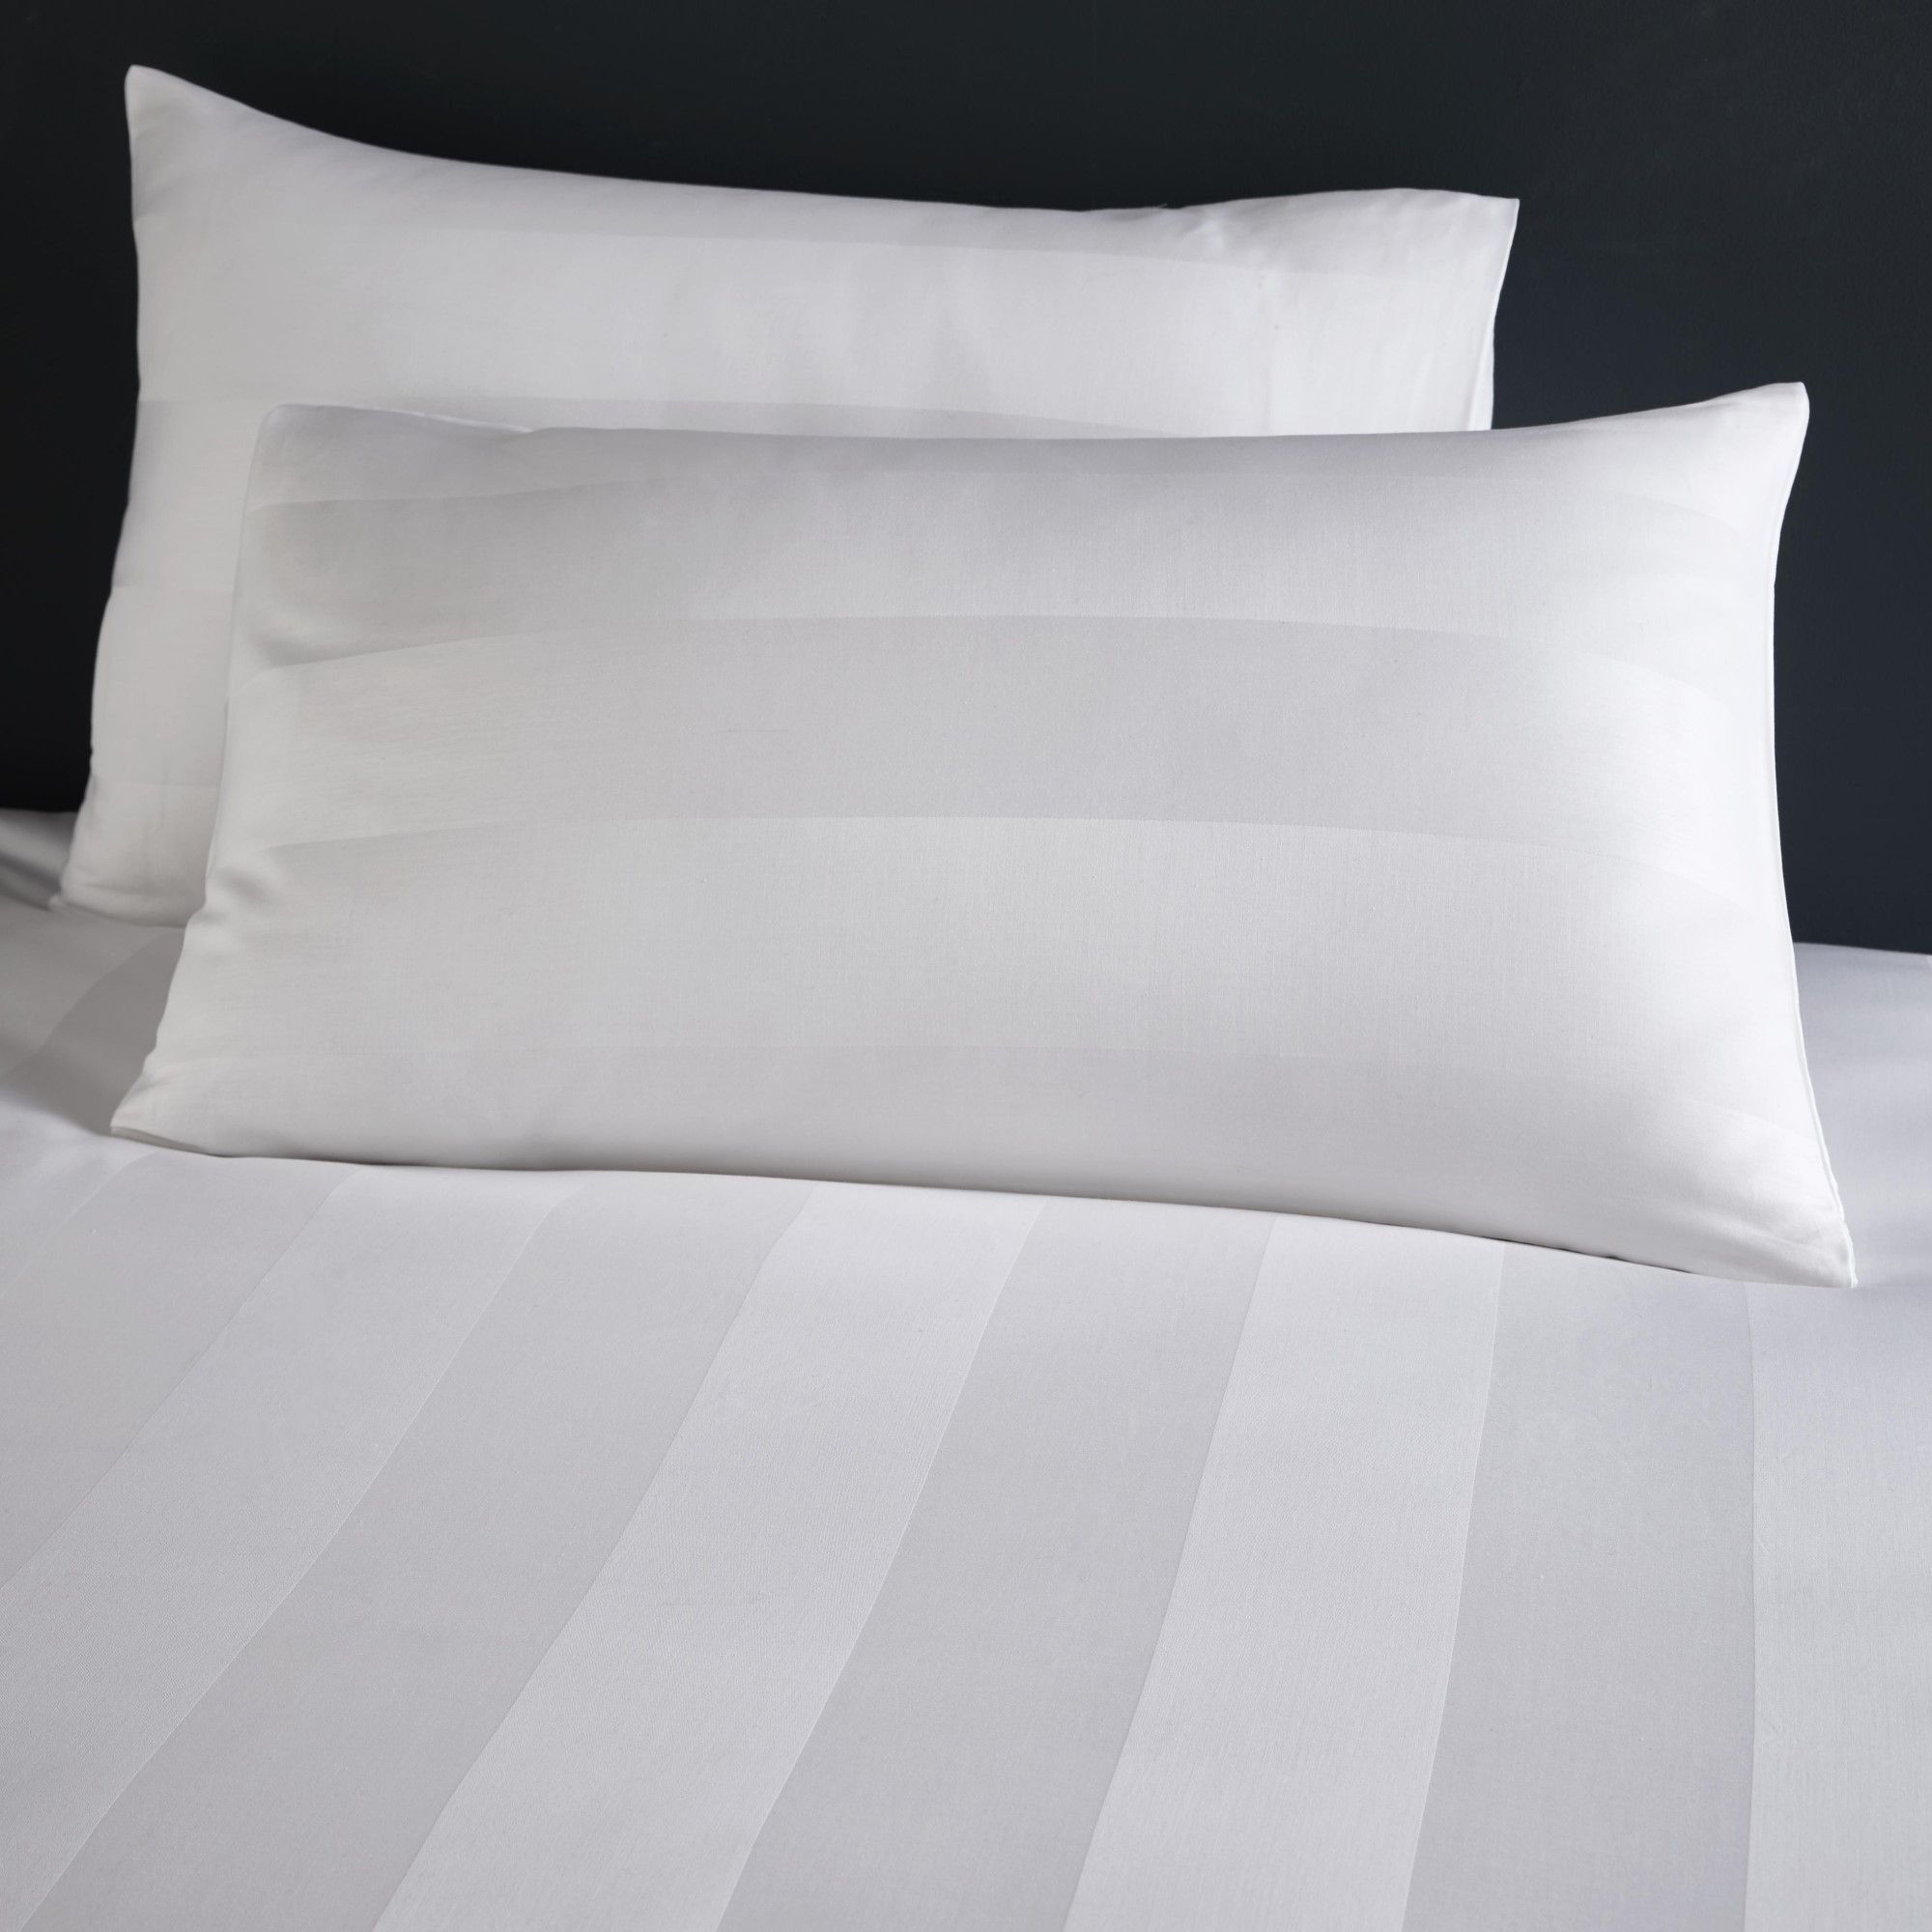 Capri Duvet Cover Set by Appletree Boutique in White - Duvet Cover Set - Appletree Boutique